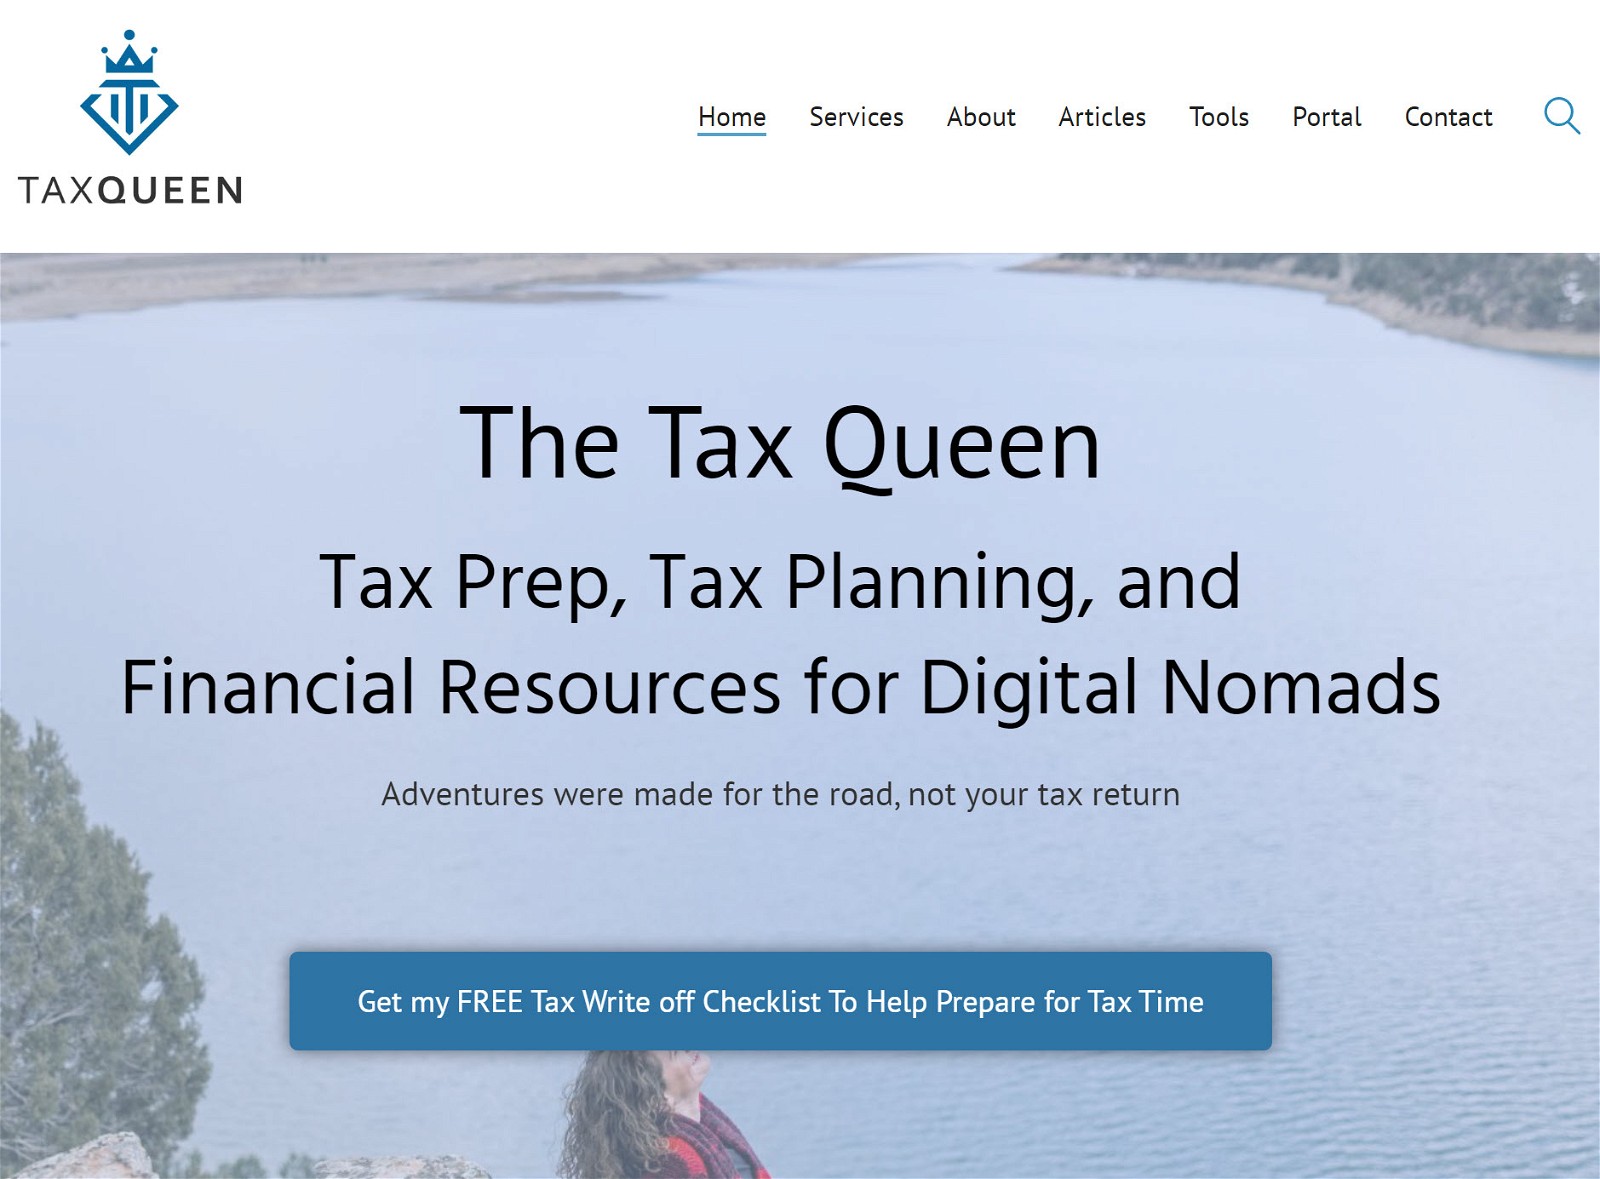 The Tax Queen homepage